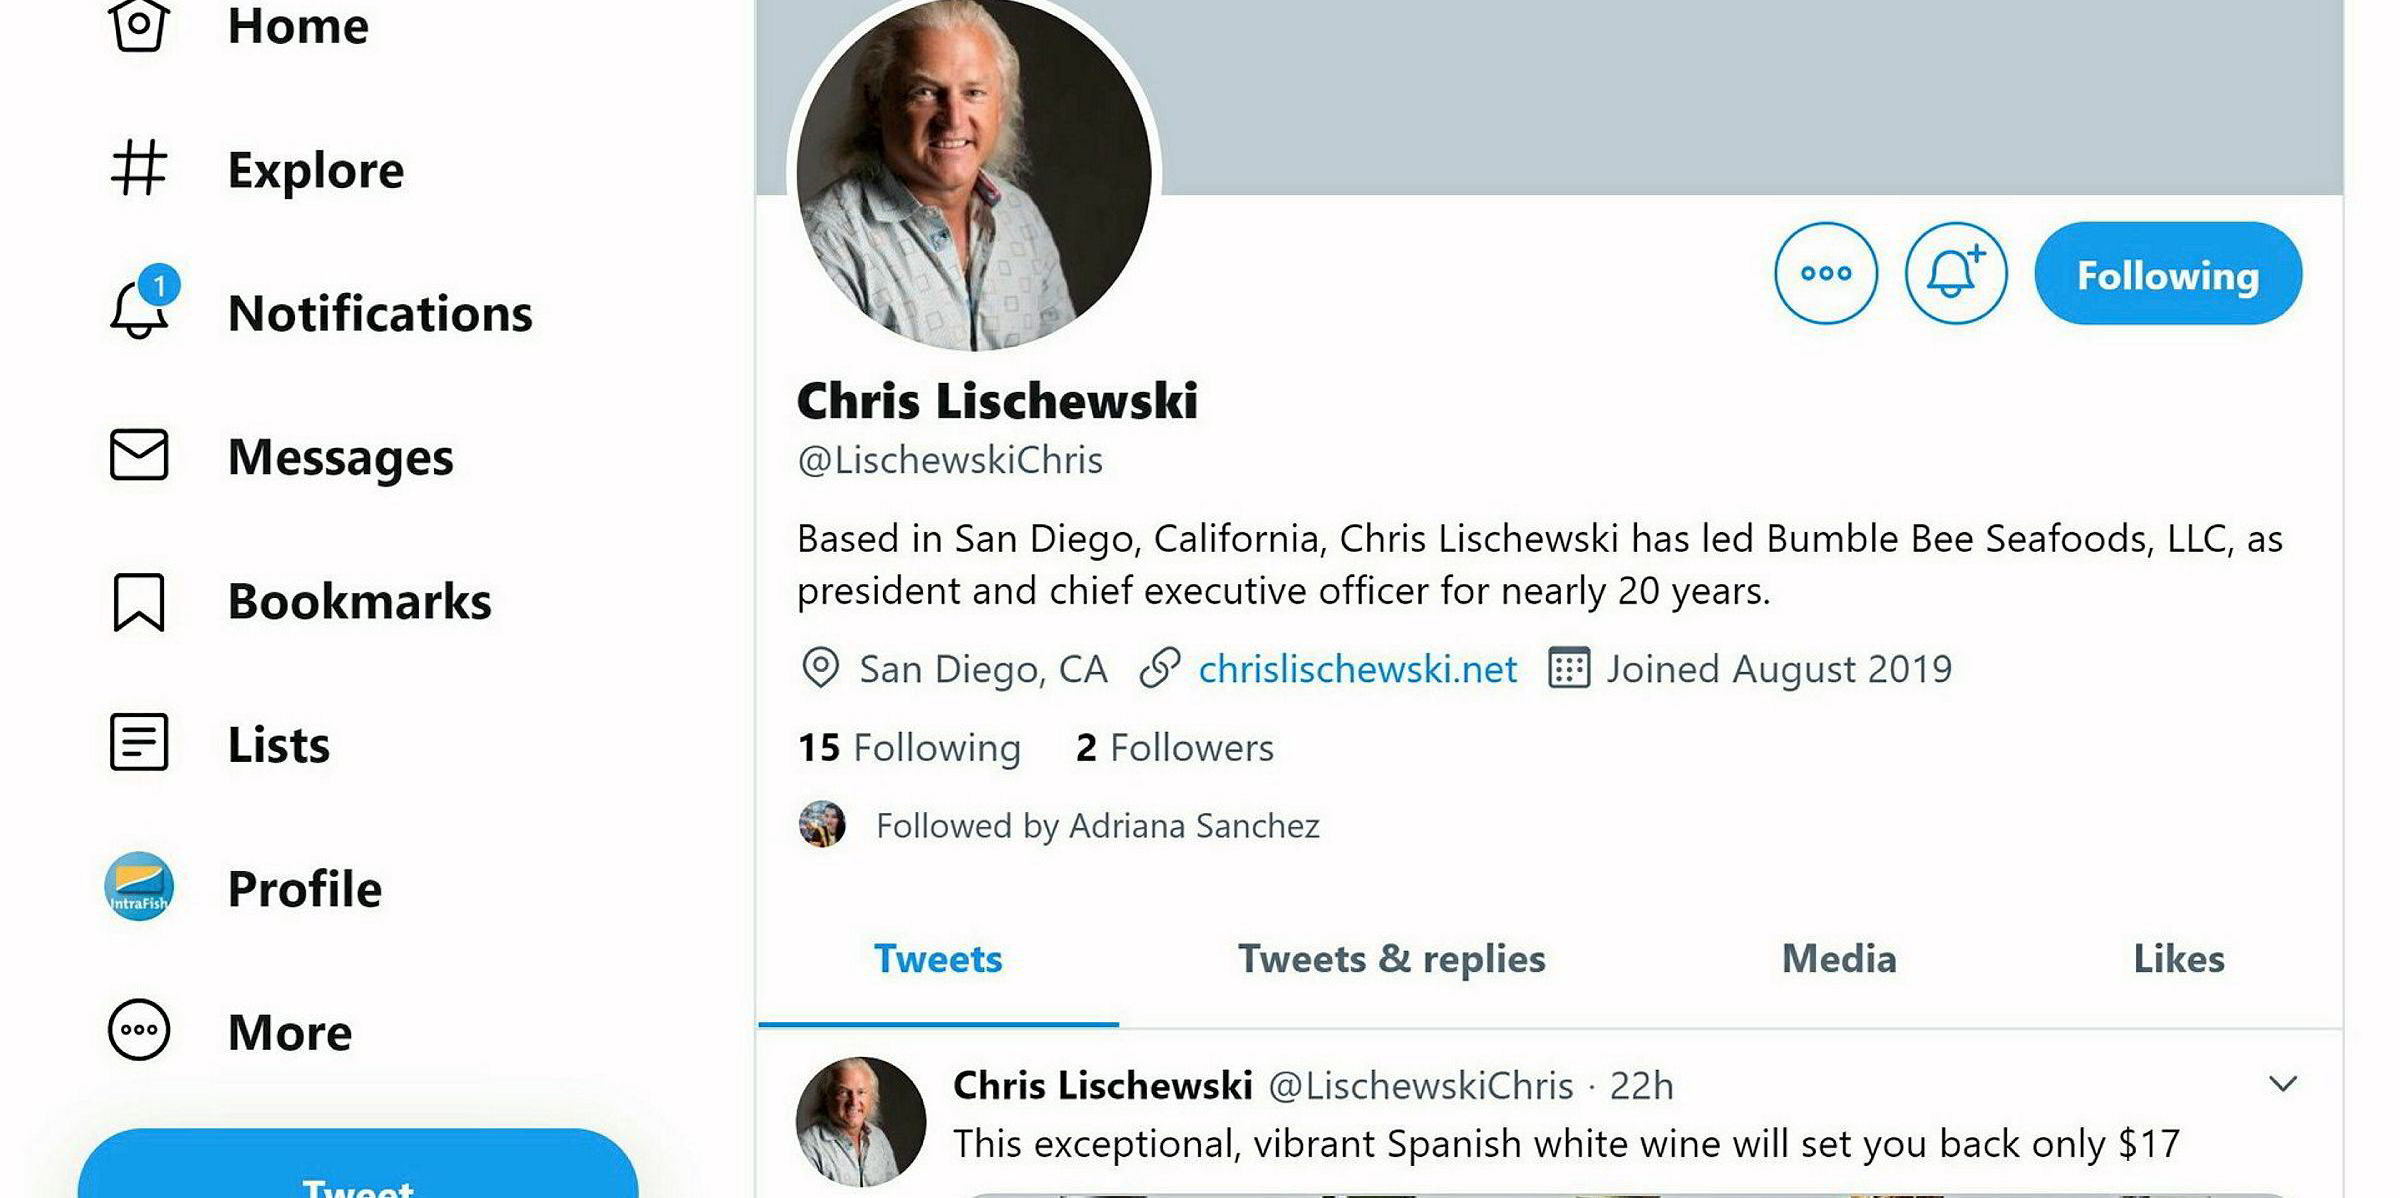 Here's what former Bumble Bee CEO Chris Lischewski was tweeting about ...